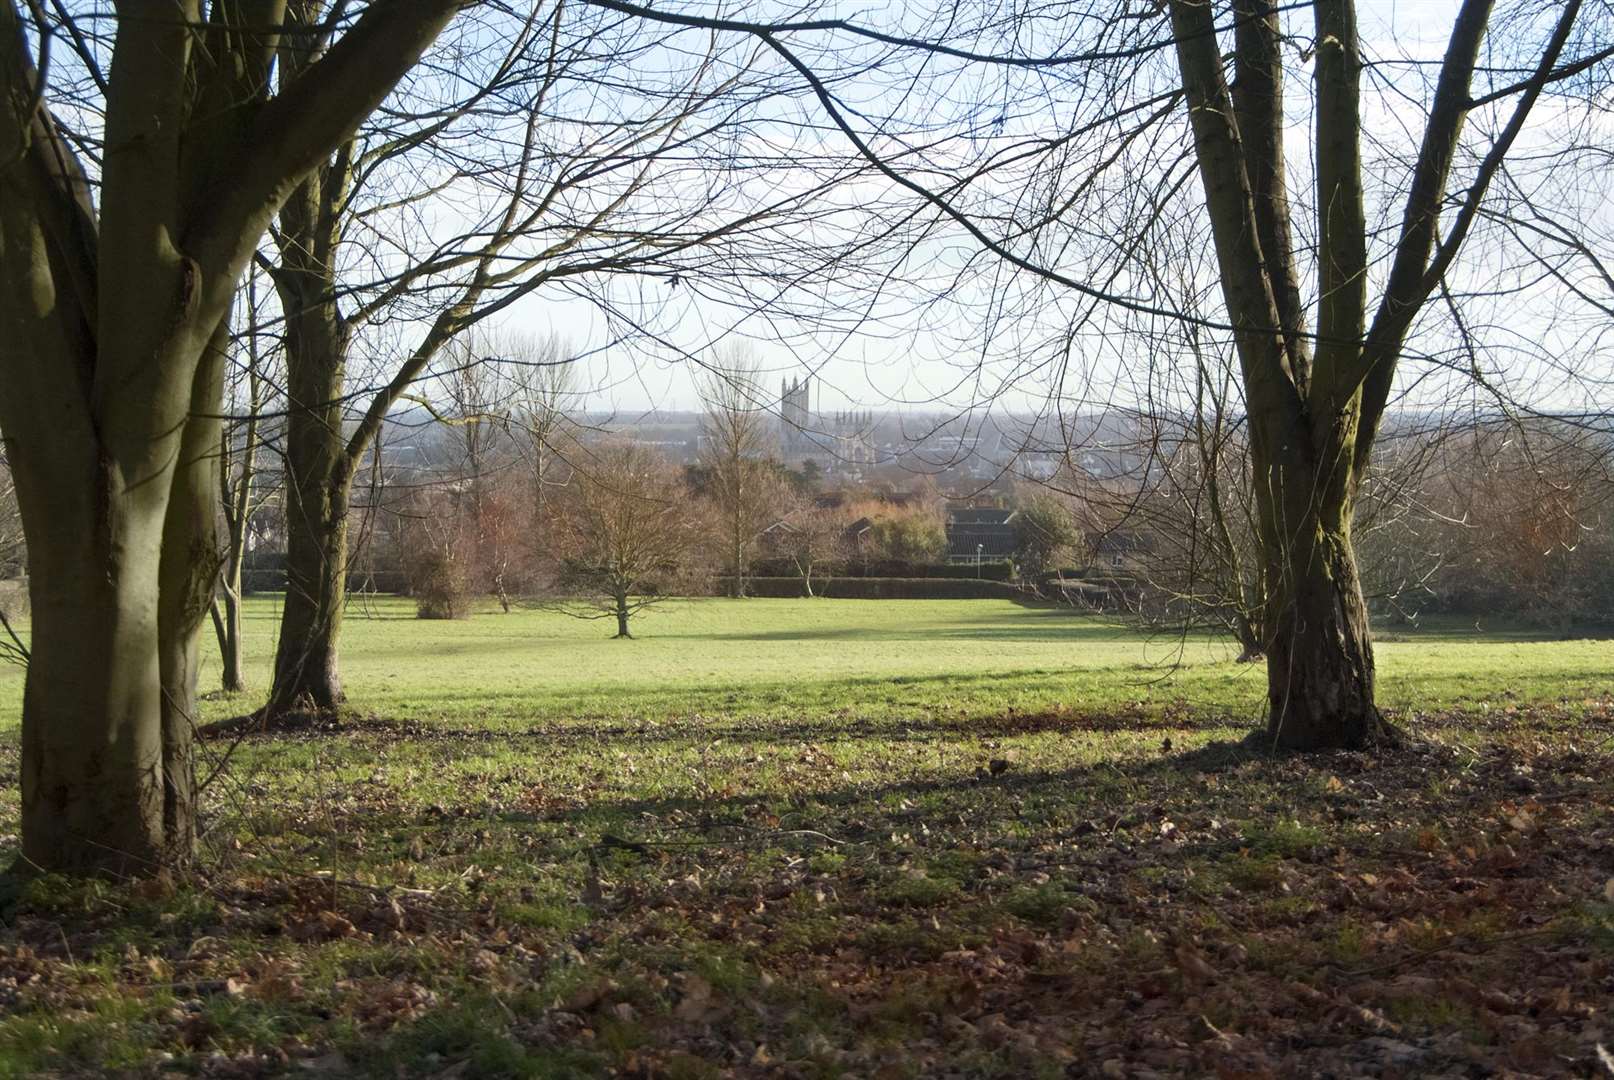 The picturesque southern slopes of the University of Kent campus